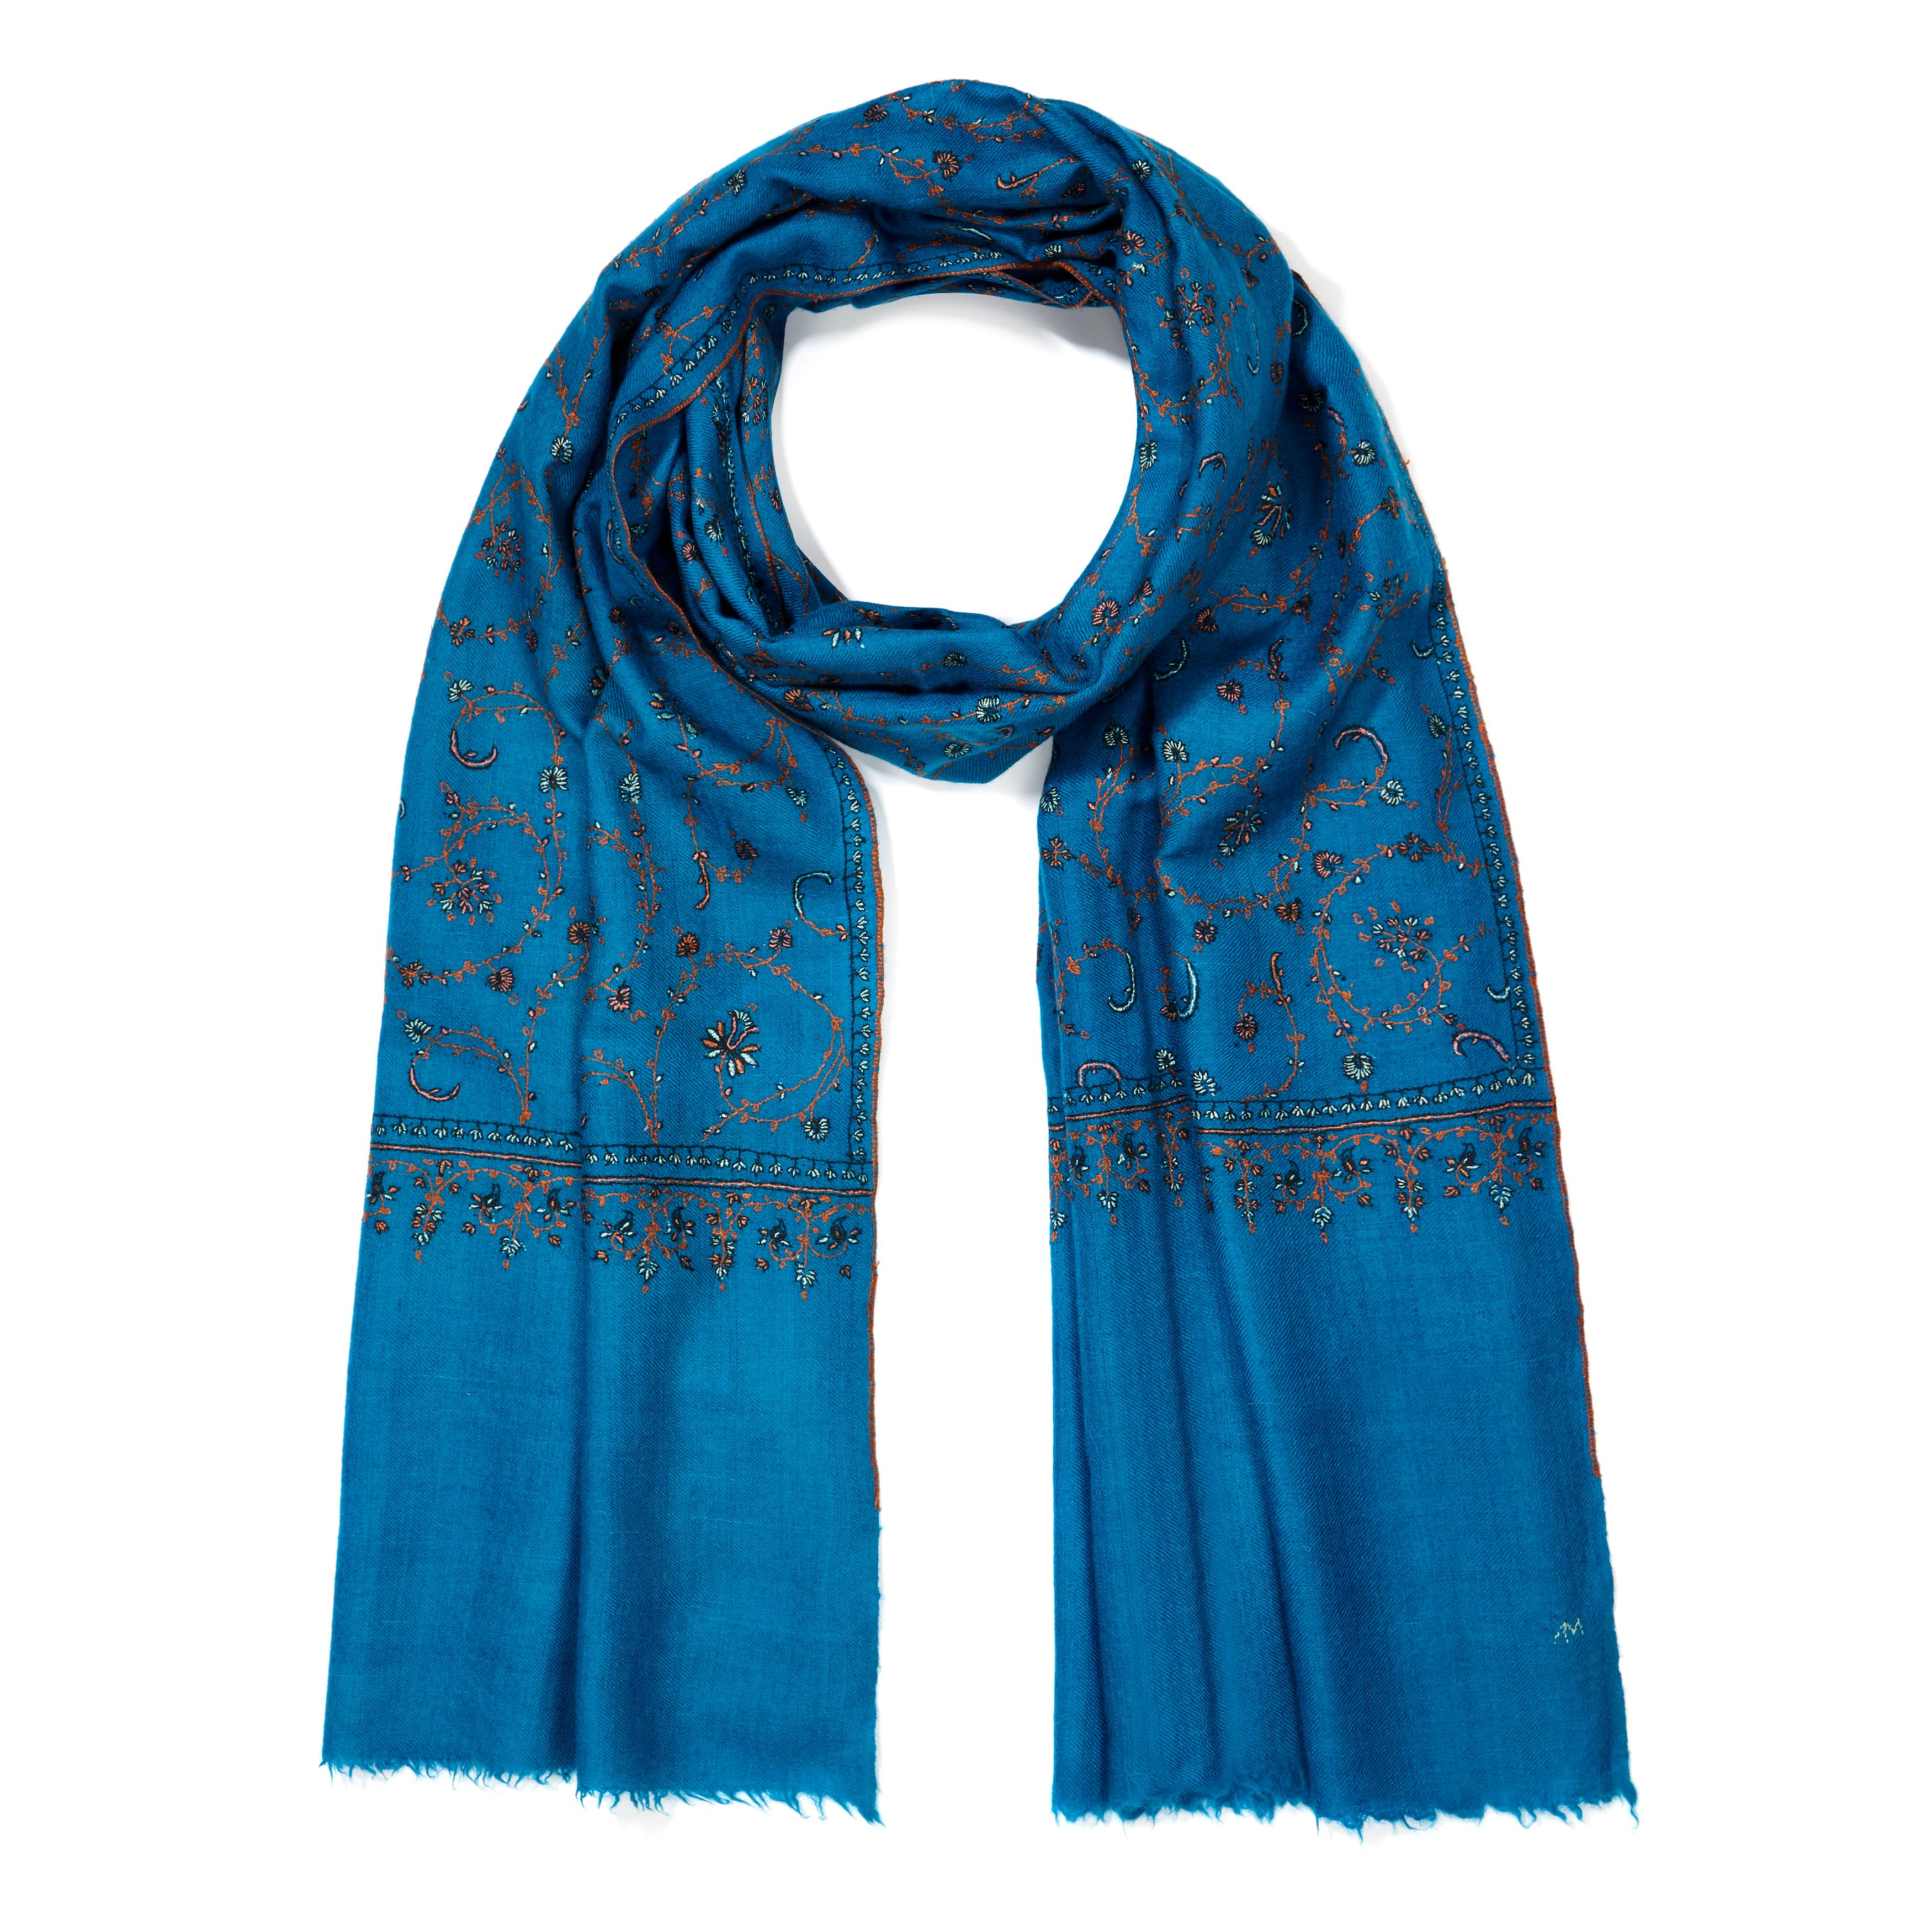 Limited Edition Hand Embroidered Cashmere Scarf in Blue Made in Kashmir - Gift

The perfect Christmas gift for someone special - this shawl is unique and handmade. 
Verheyen London’s shawl is spun from the finest embroidered woven in 100% cashmere